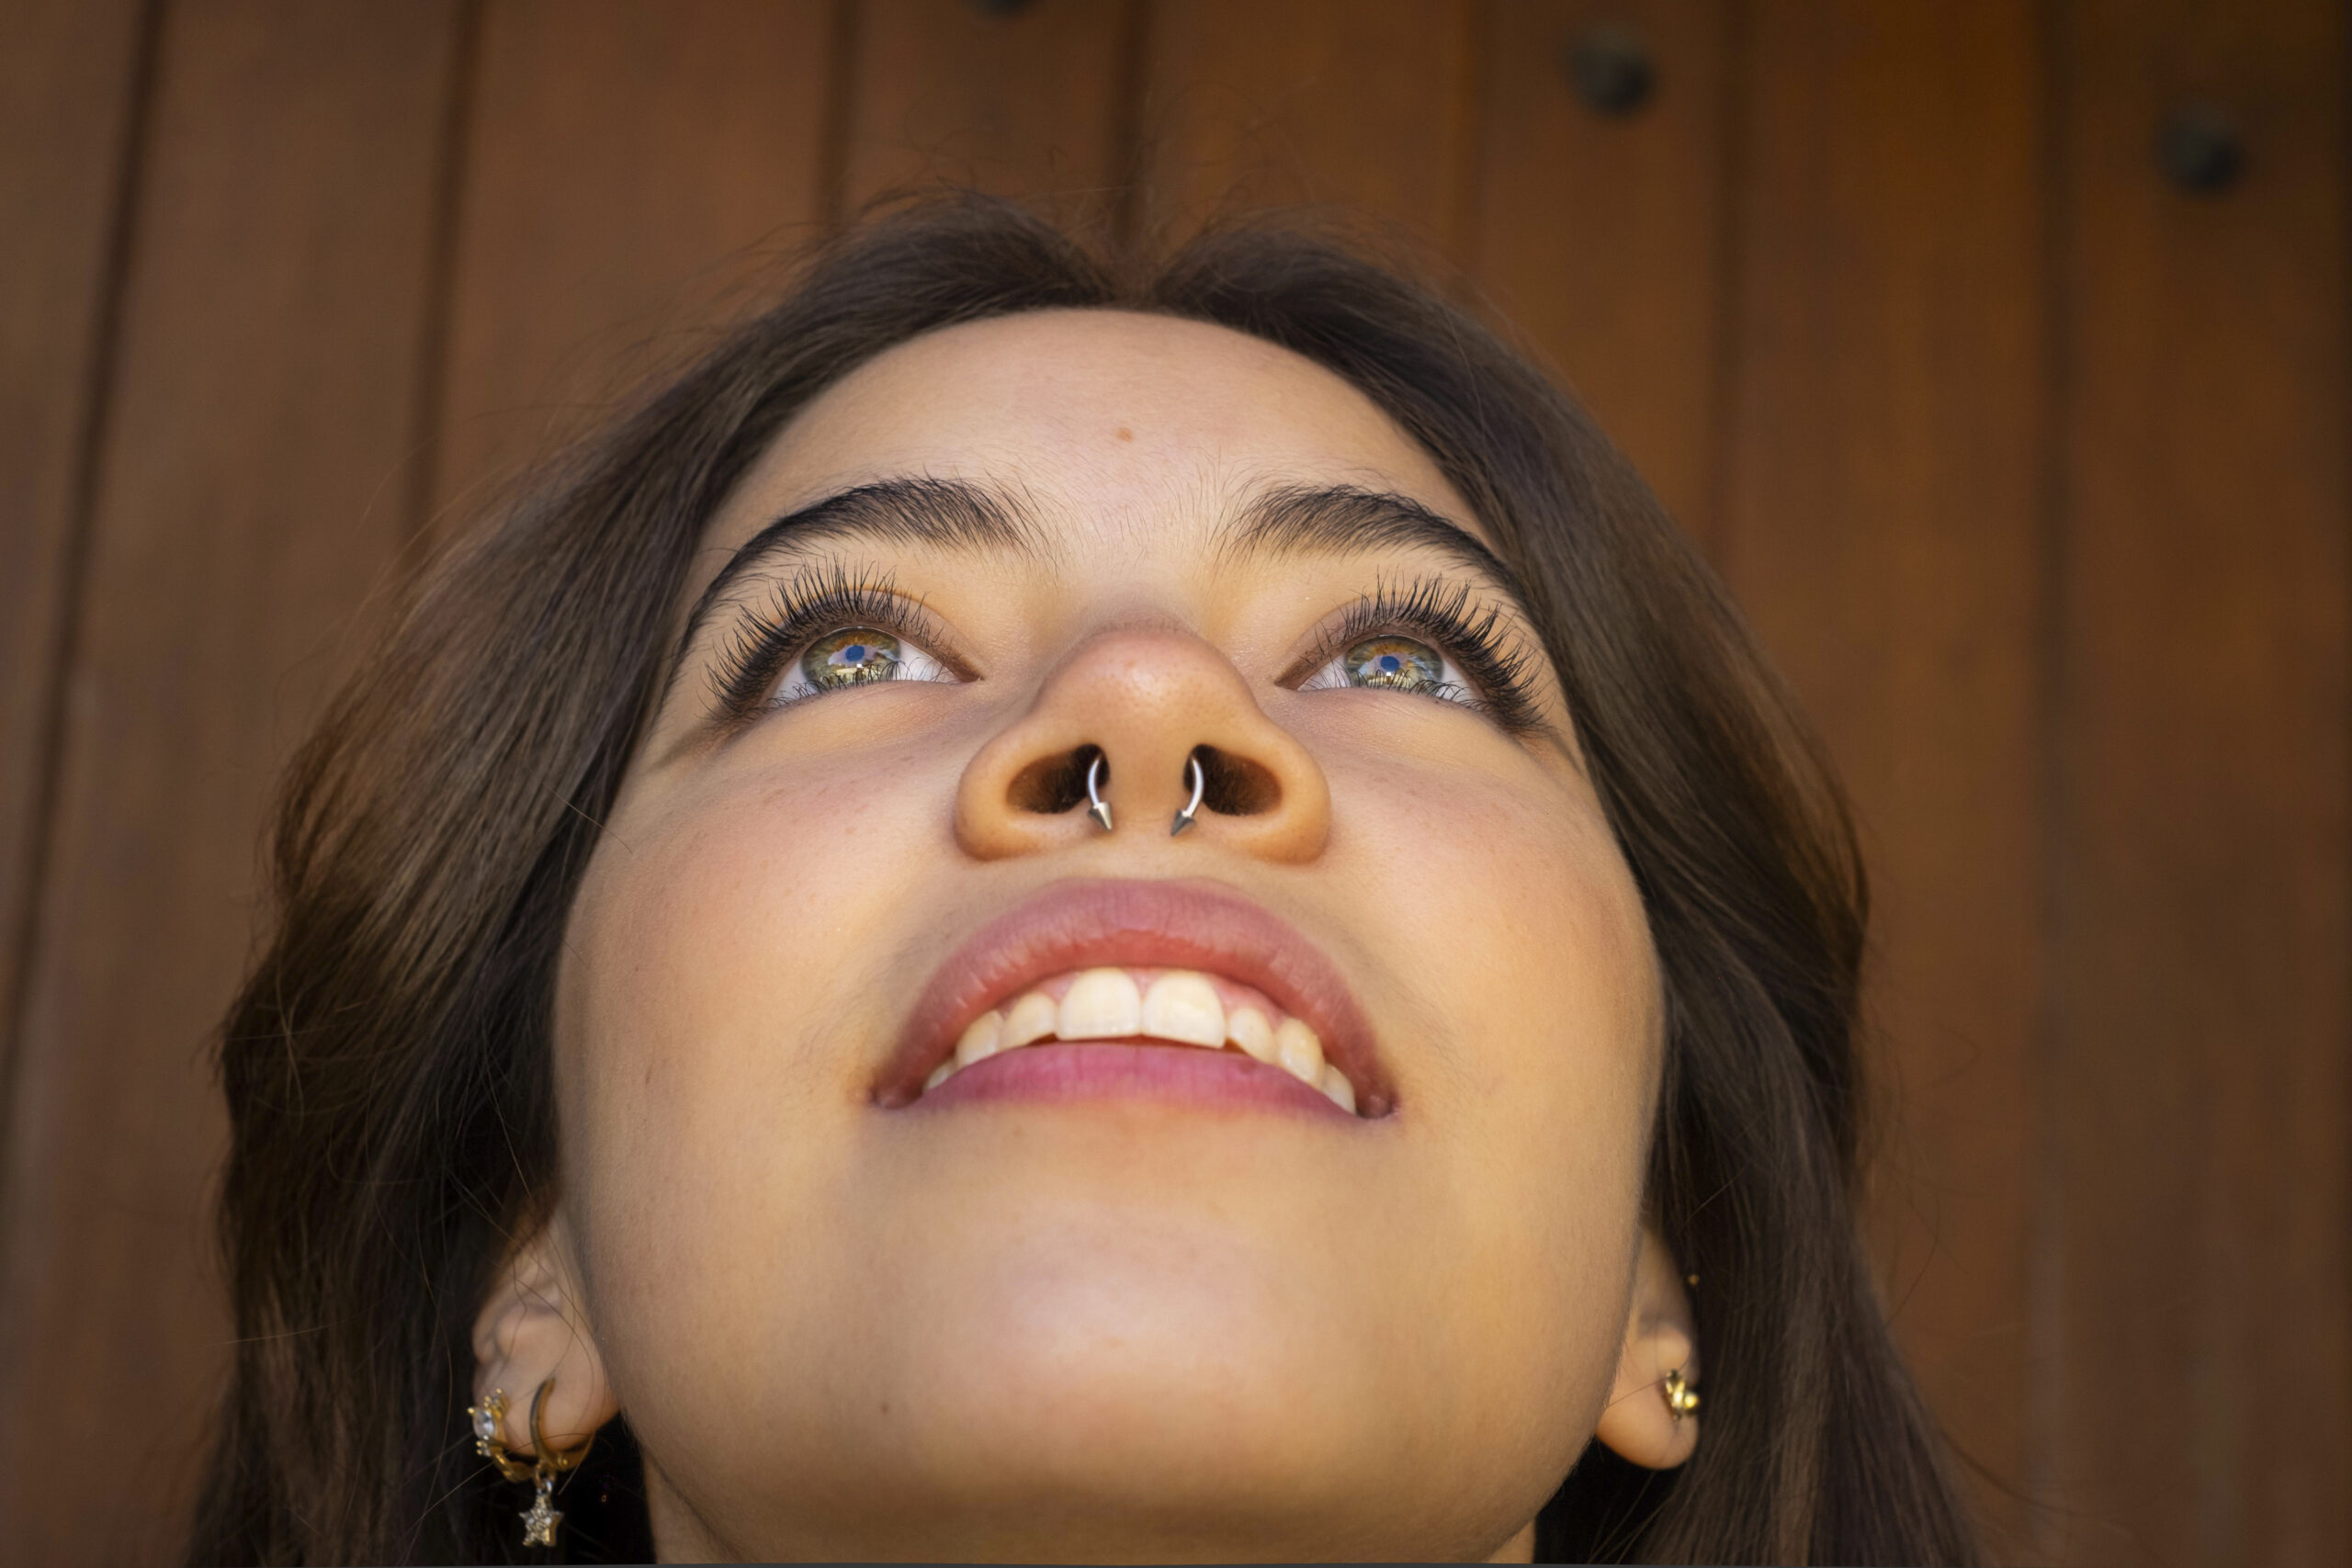 Young Latino woman looking up and showing a nose ring piercing, brown wooden background